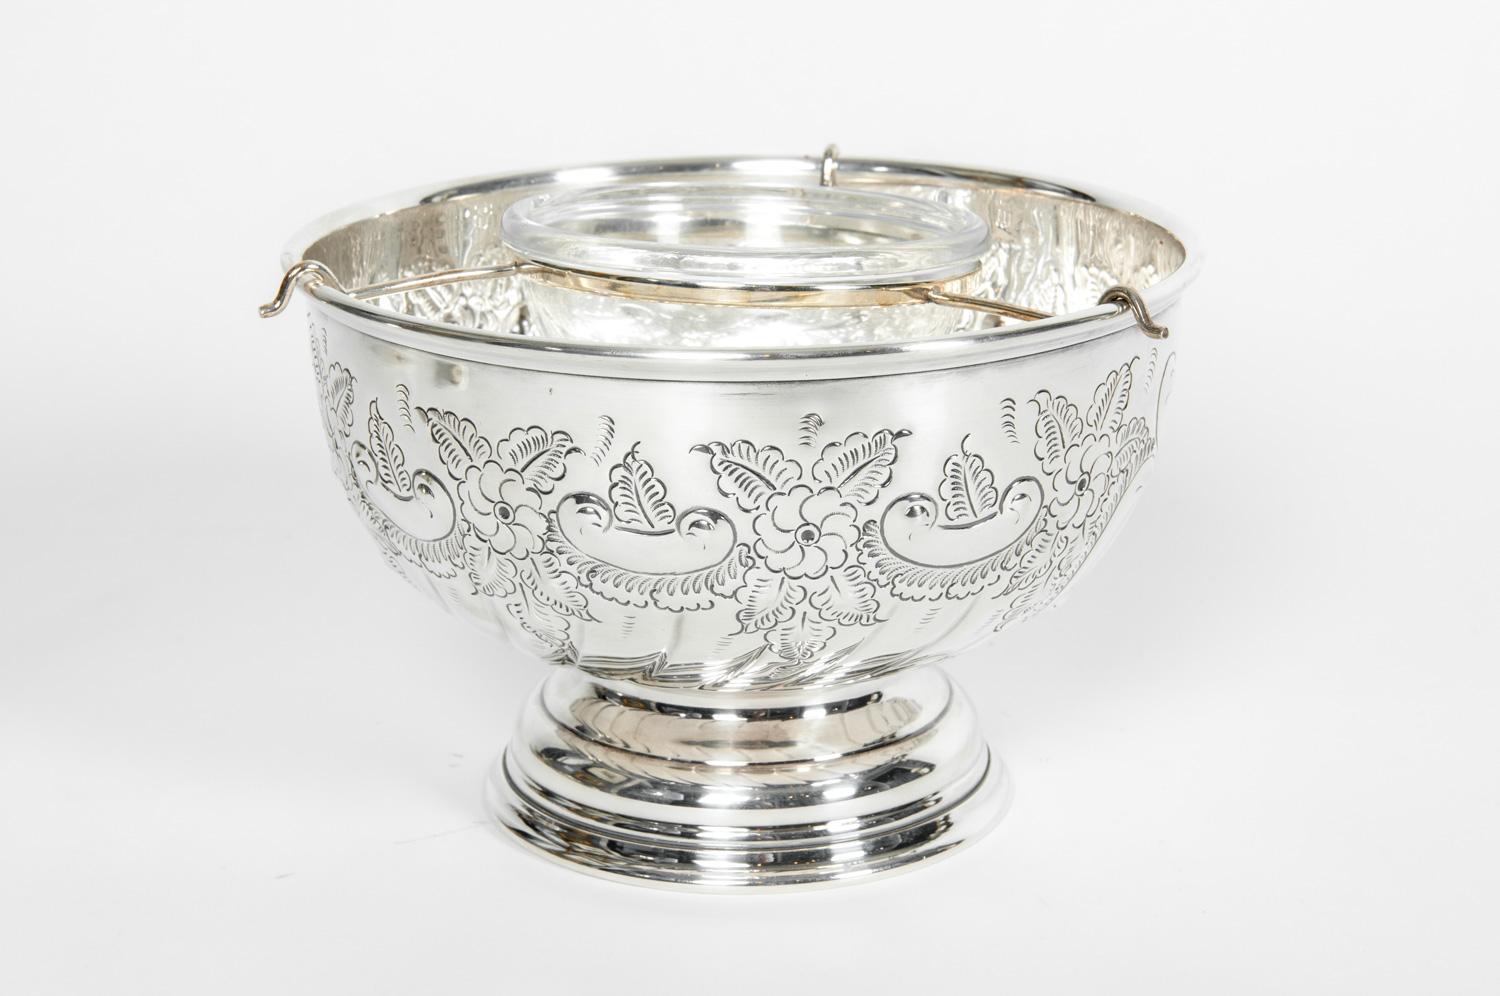 Antique English silver plate caviar dish service. Each piece is in excellent condition, maker's mark undersigned. The silver plate bowl measure 8.4 inches diameter x 5 inches high. The crystal caviar bowl is about 4.4 inches diameter x 2 inches high.